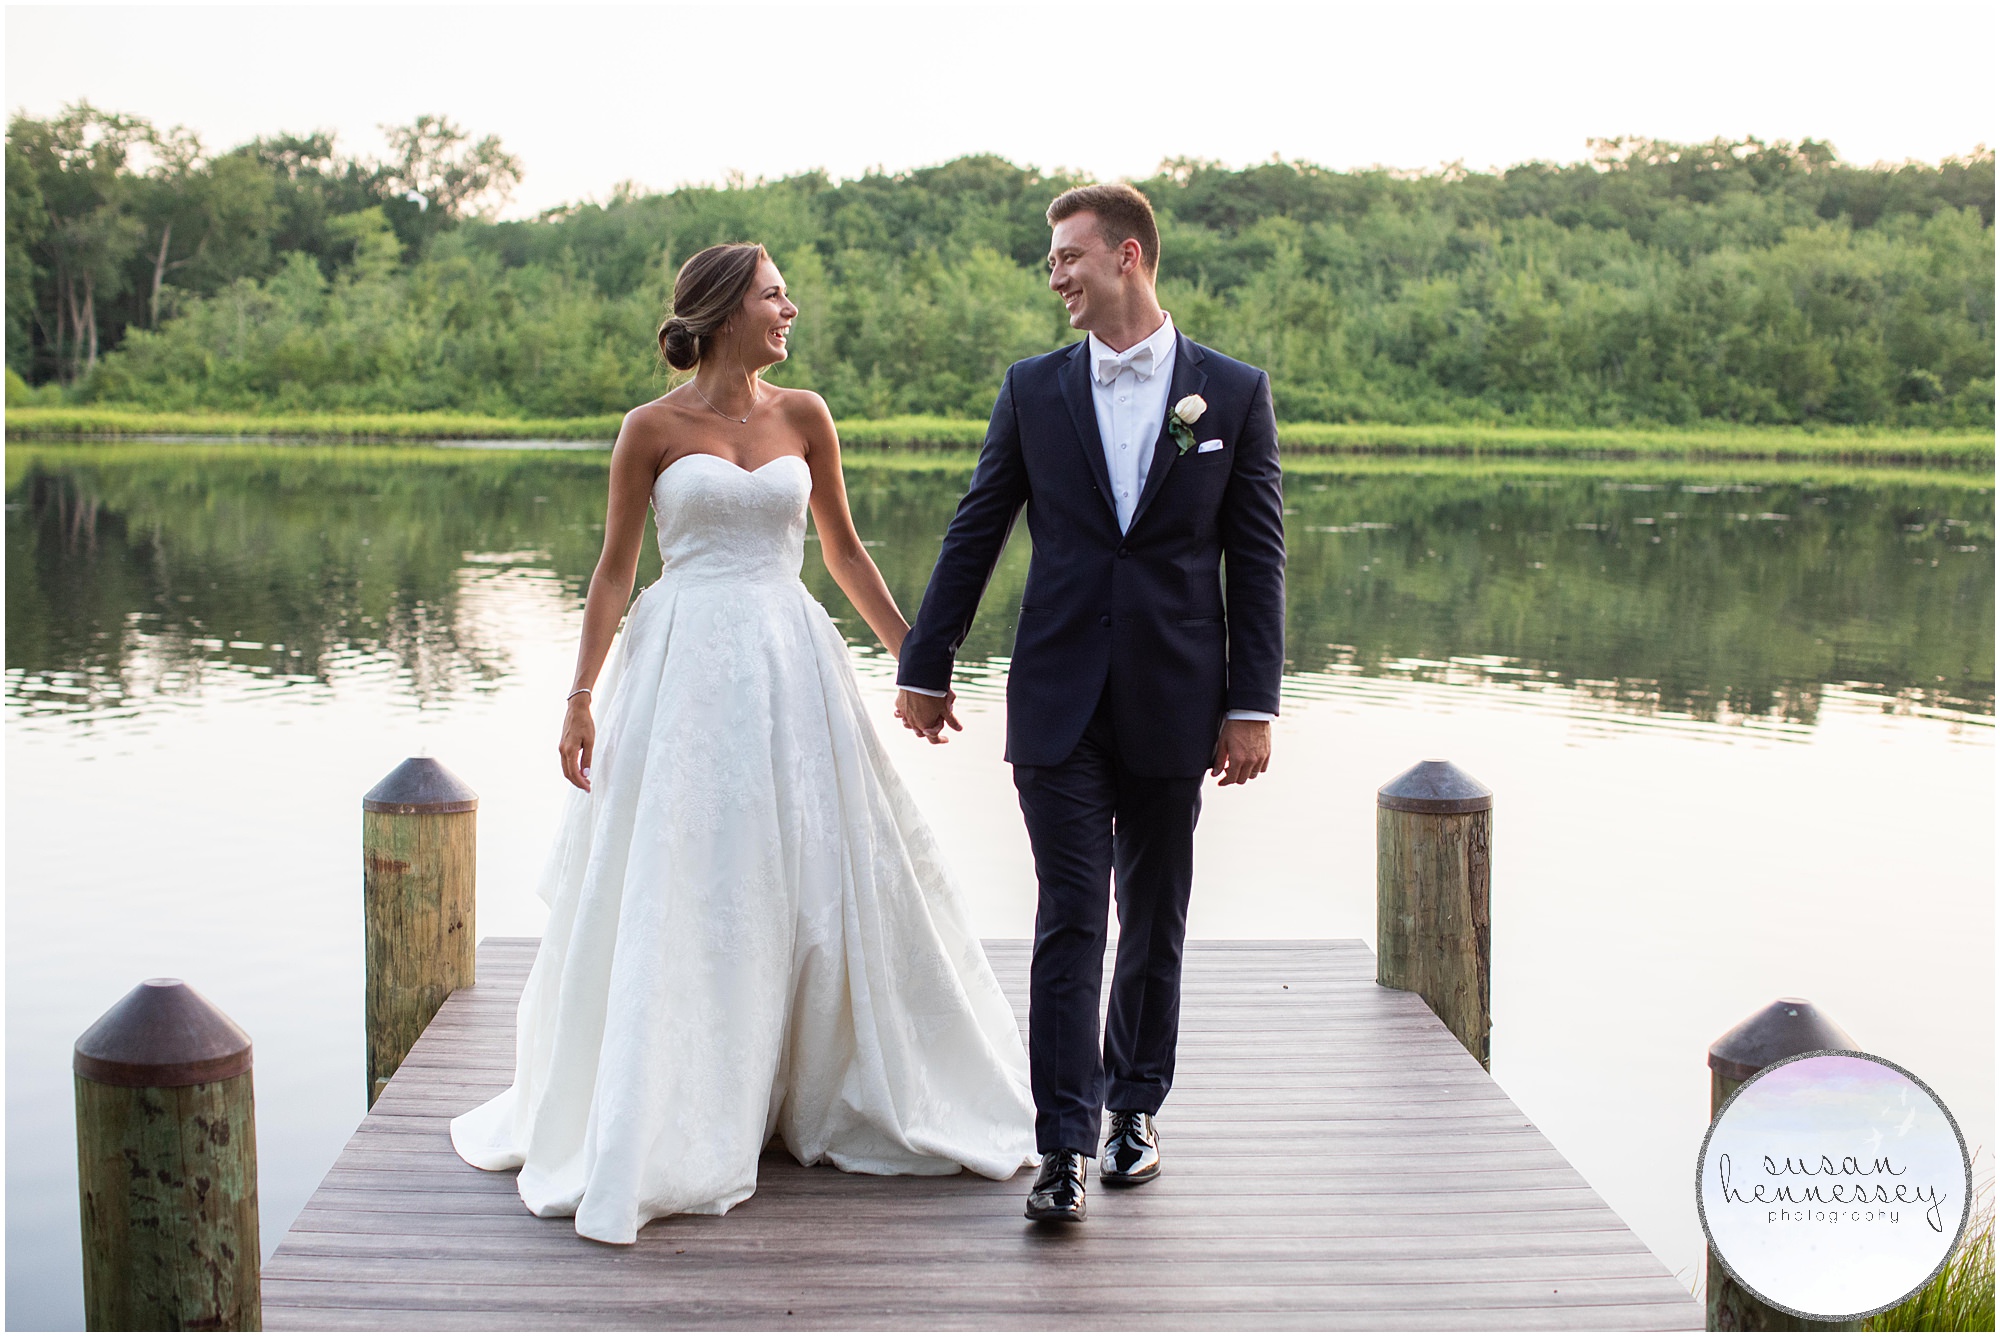 Bride and groom portraits on lake in Central Jersey